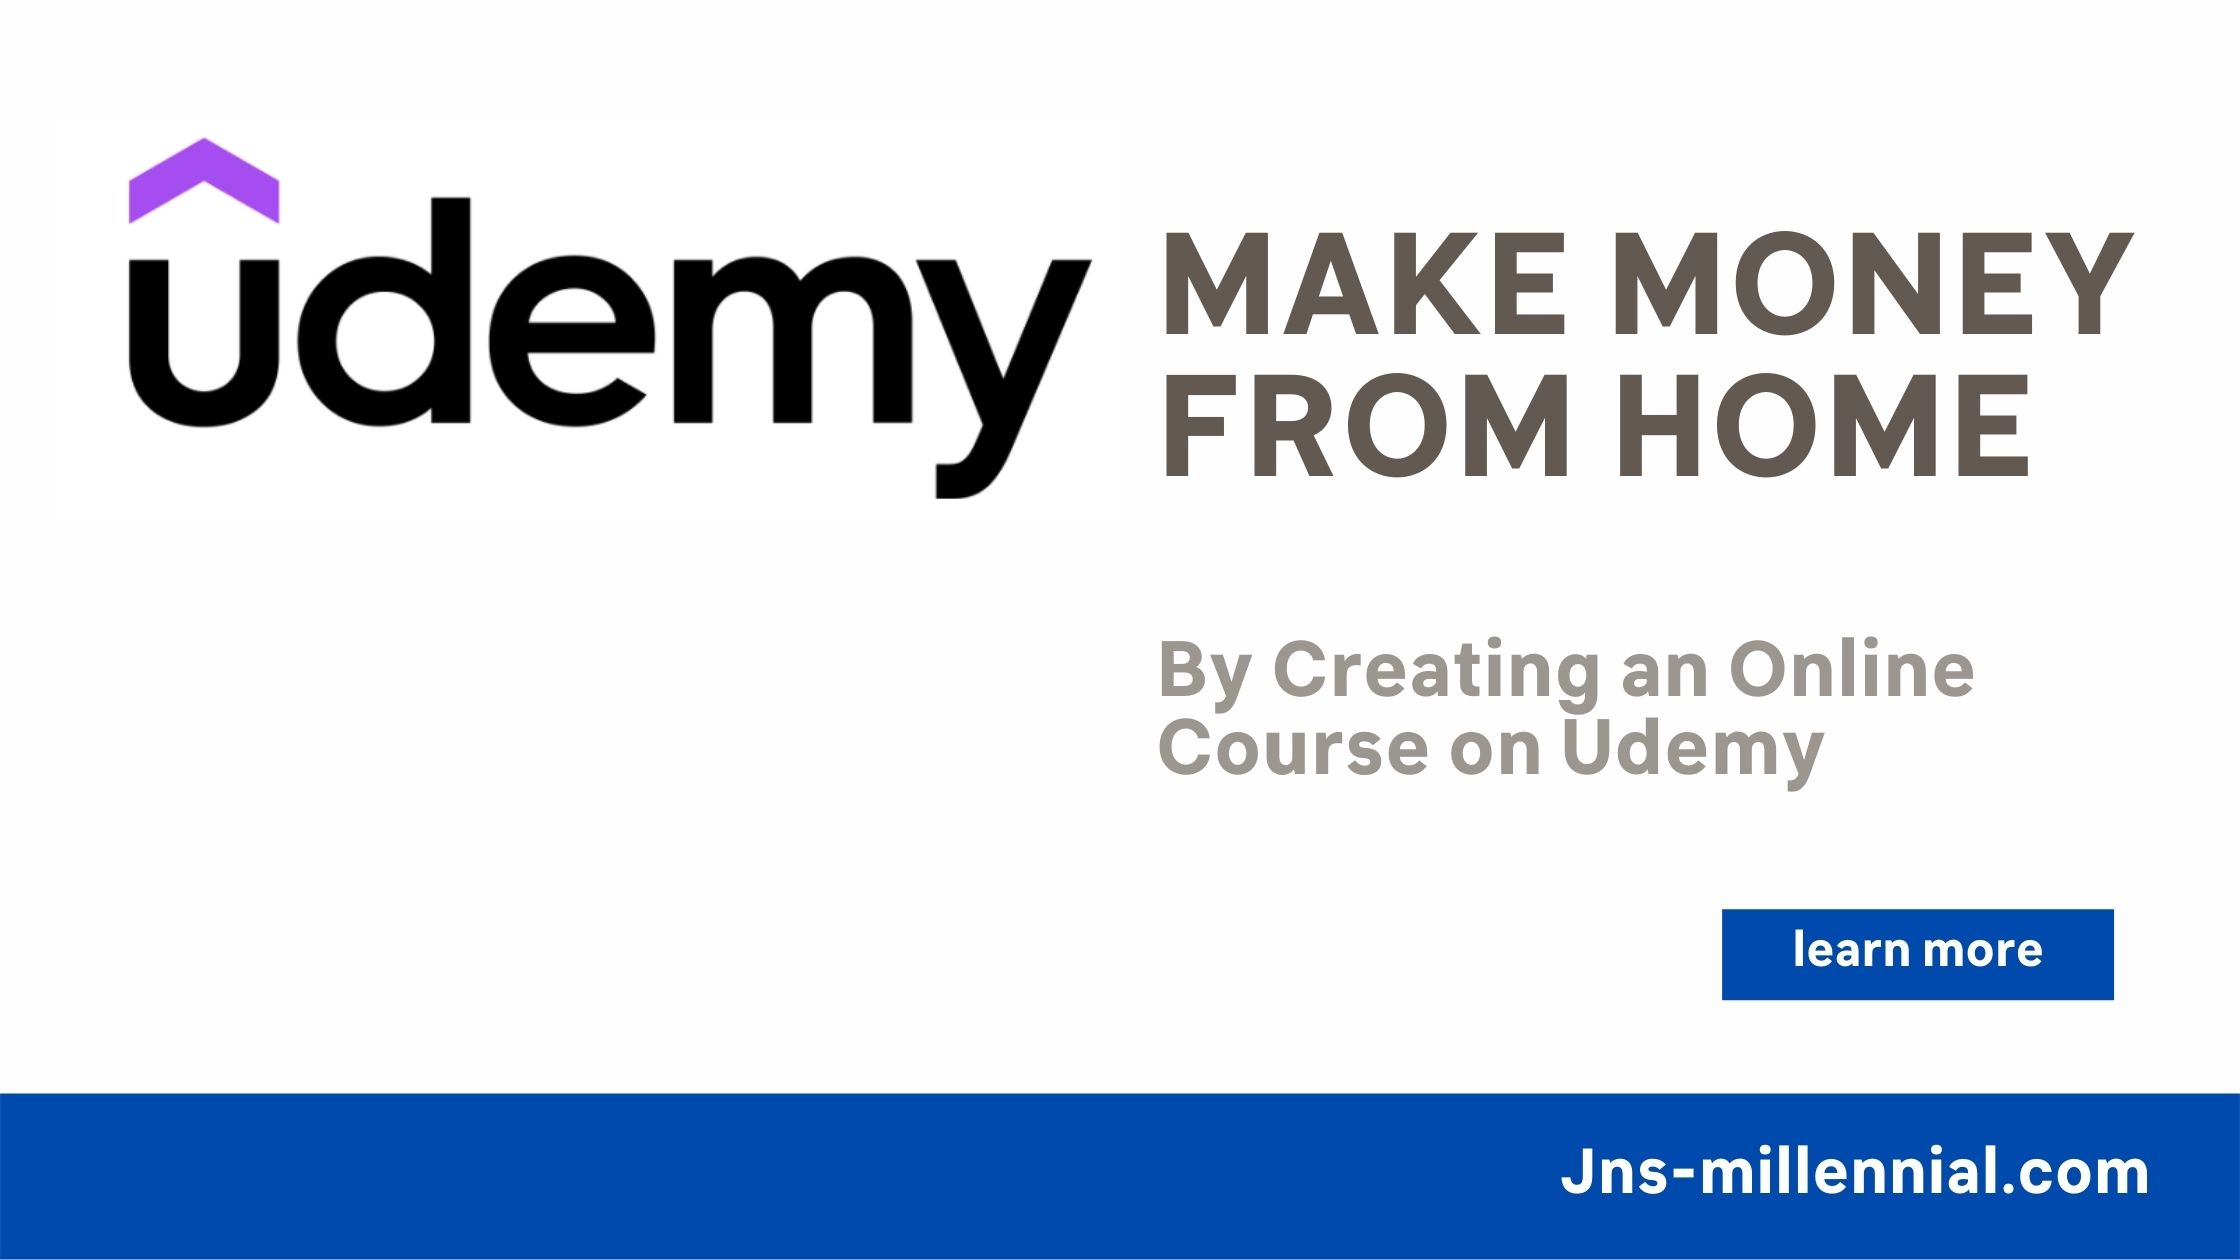 Make money from home by creating an online course on Udemy